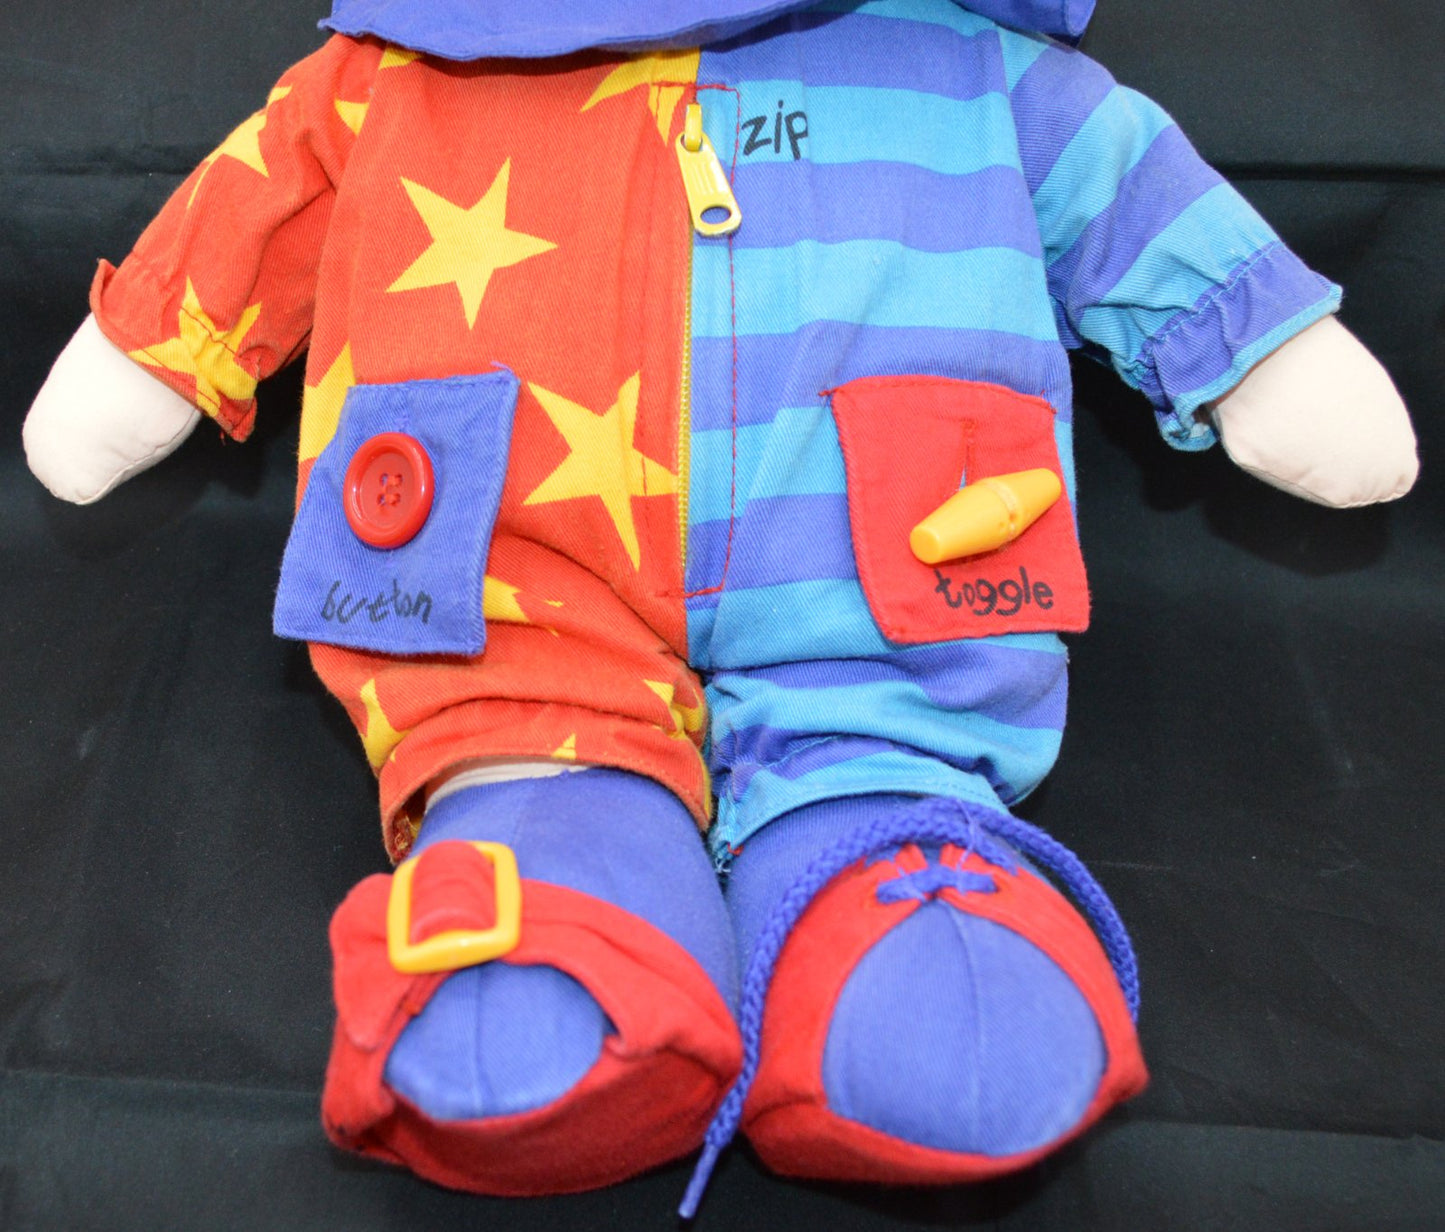 SOFT TOY LEARN TO DRESS CLOWN - TMD167207